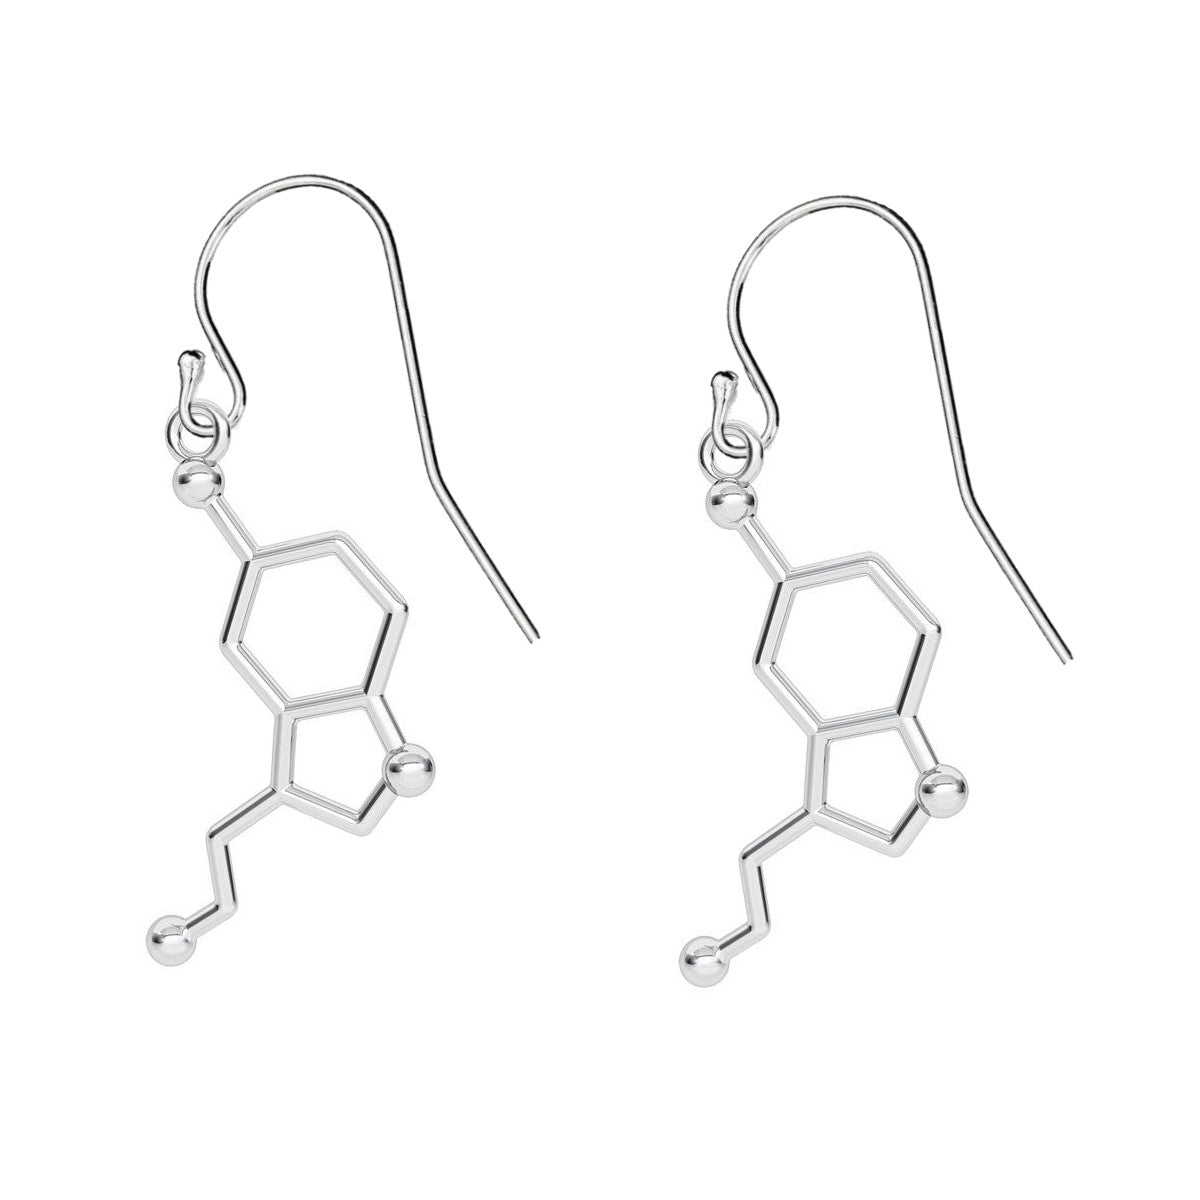 A pair of silver earrings in the form of the serotonin molecule, a neurotransmitter that promotes emotions of happiness, satisfaction, and relaxation. The serotonin molecule served as the inspiration for these sterling silver 'Be Happy' earrings, in sterling silver for sensitive ears (no nickel). 